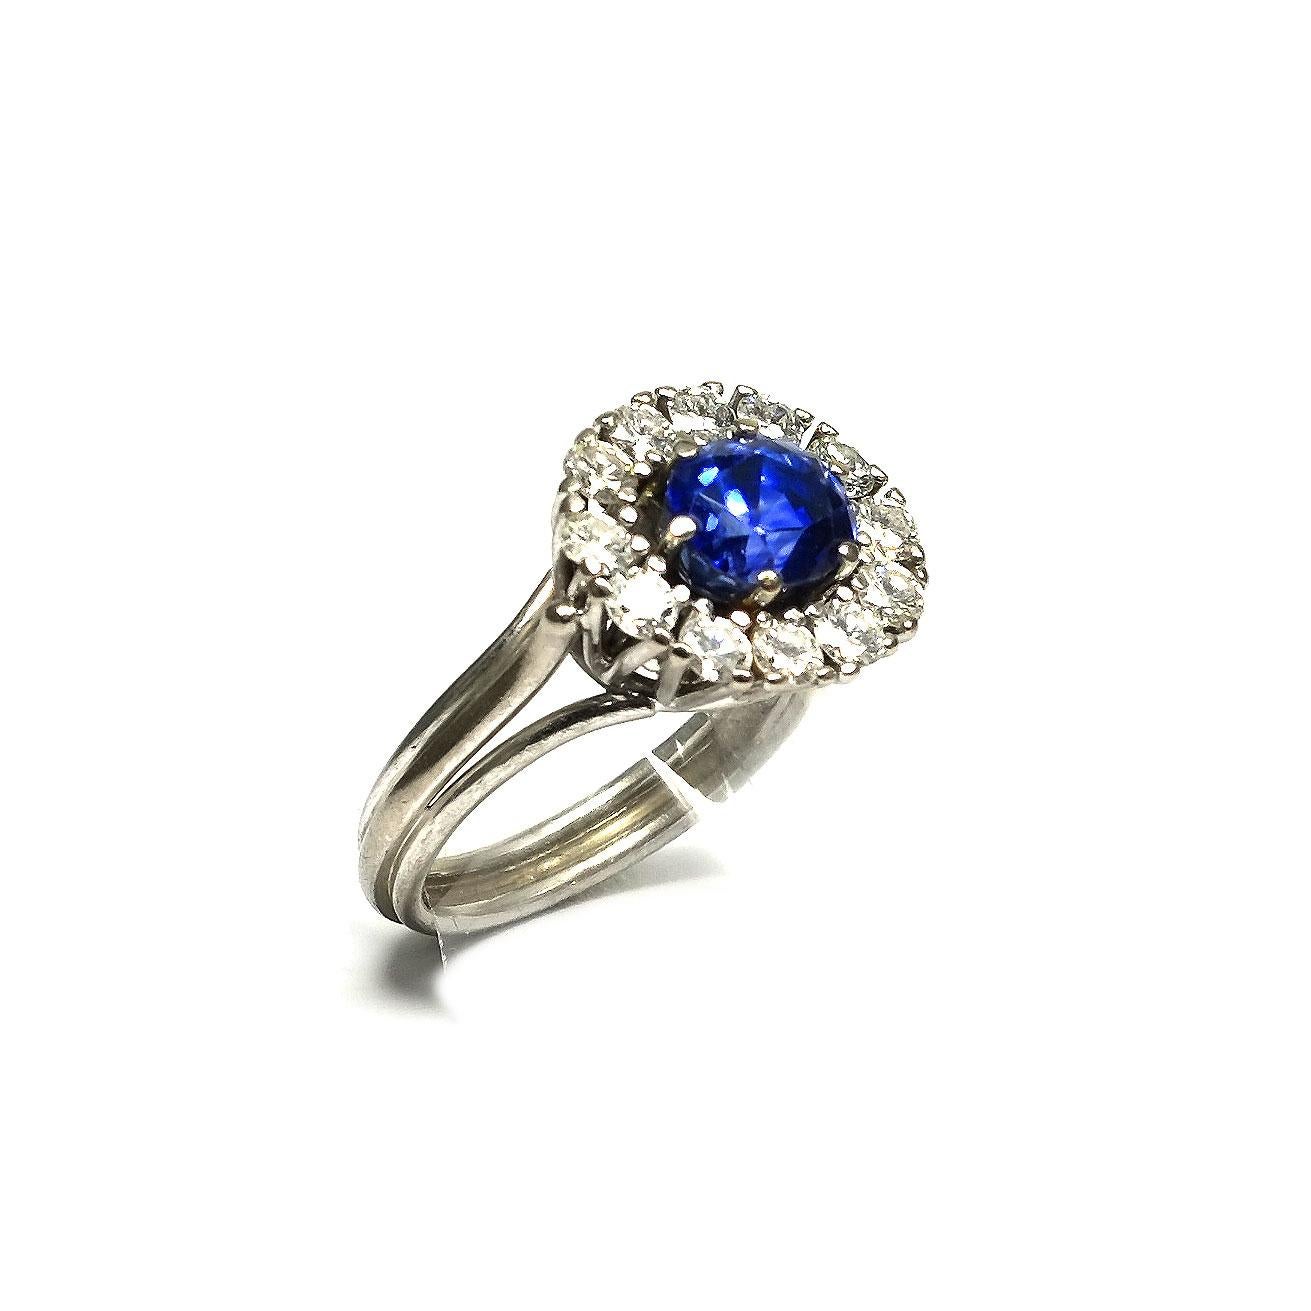 Certified 2.7 Carat Sapphire and Diamond Cluster Ring in Platinum

Classically elegant cluster ring set with an oval, natural cornflower blue sapphire of 2.70 ct in a setting of 12 brilliant cut diamonds with a total weight of 1.14 carat.


